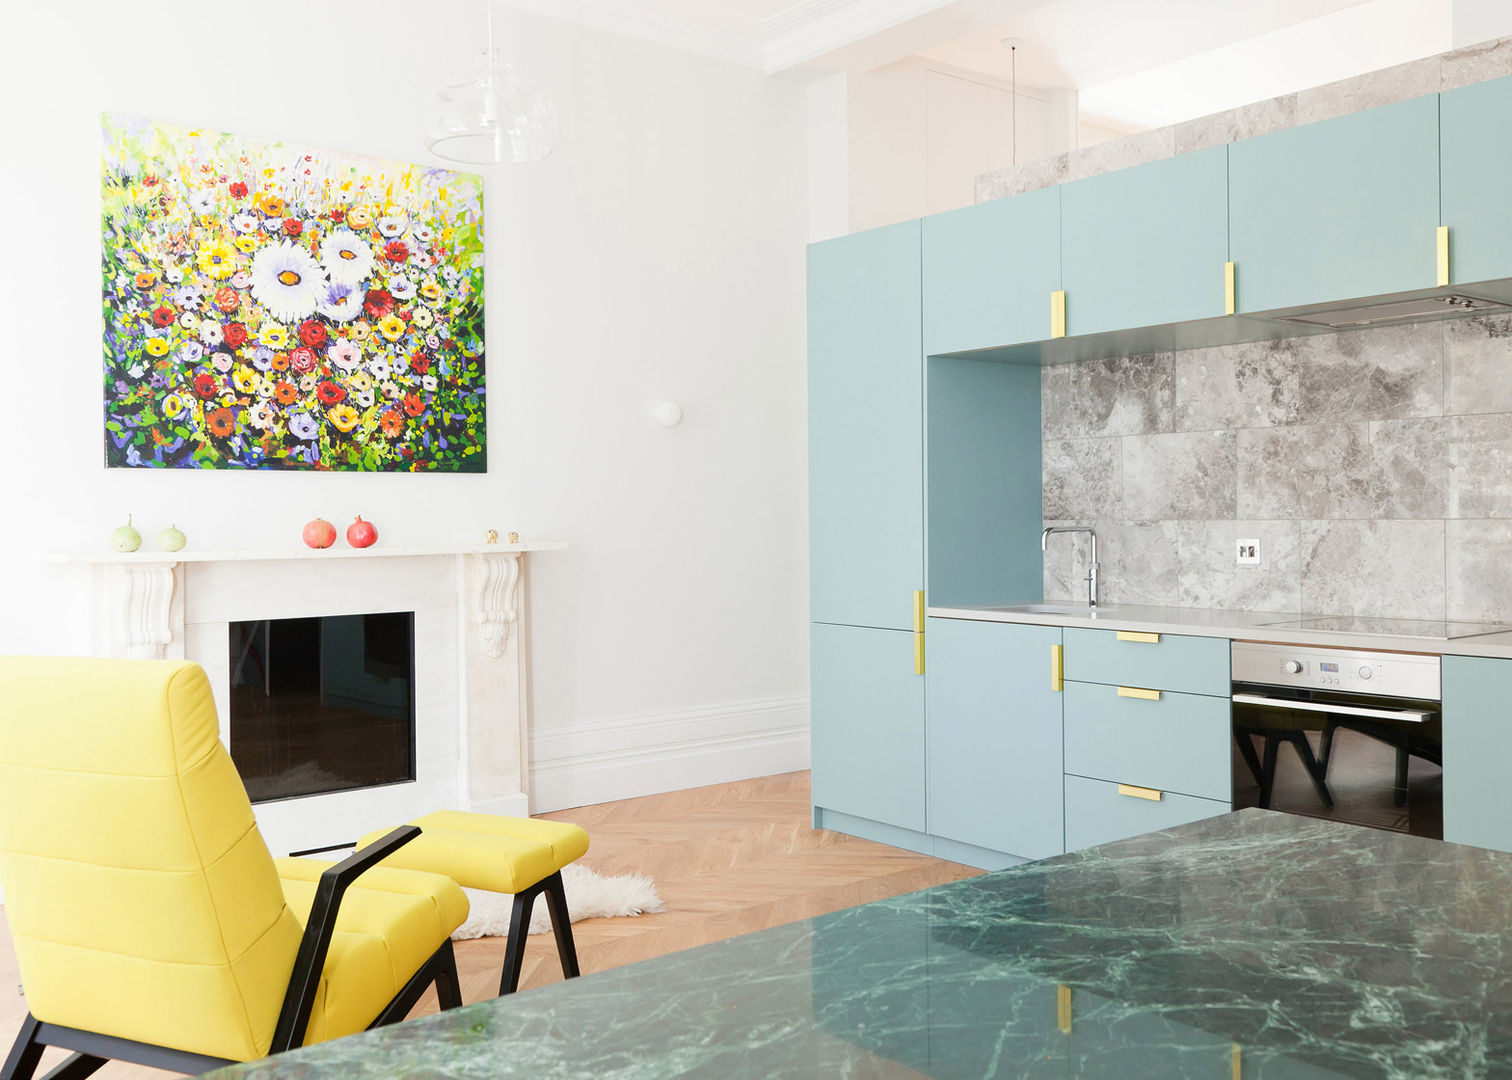 Westbourne Gardens NAKED Kitchens Dapur Modern yellow chair,blue cabinets,gold handles,miele,oven,floral artwork,fireplace,modern,open plan,contemporary,mottled grey tiles